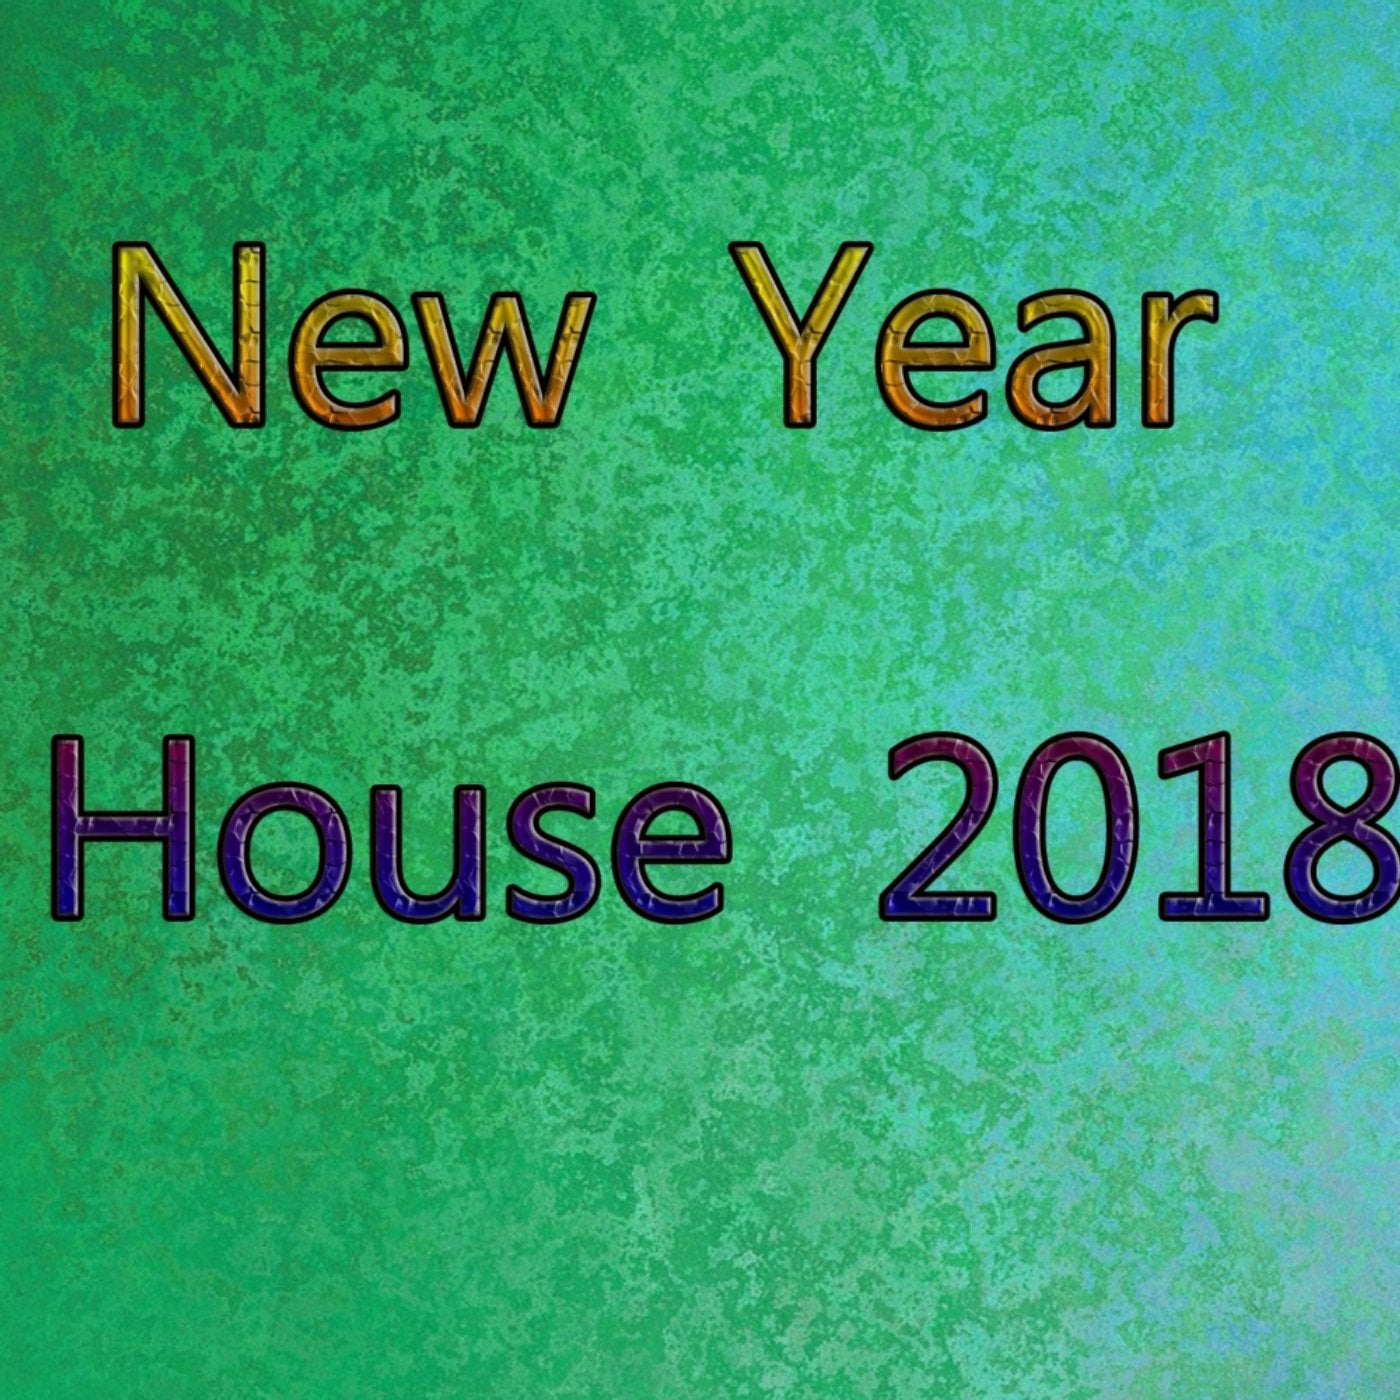 New Year House 2018